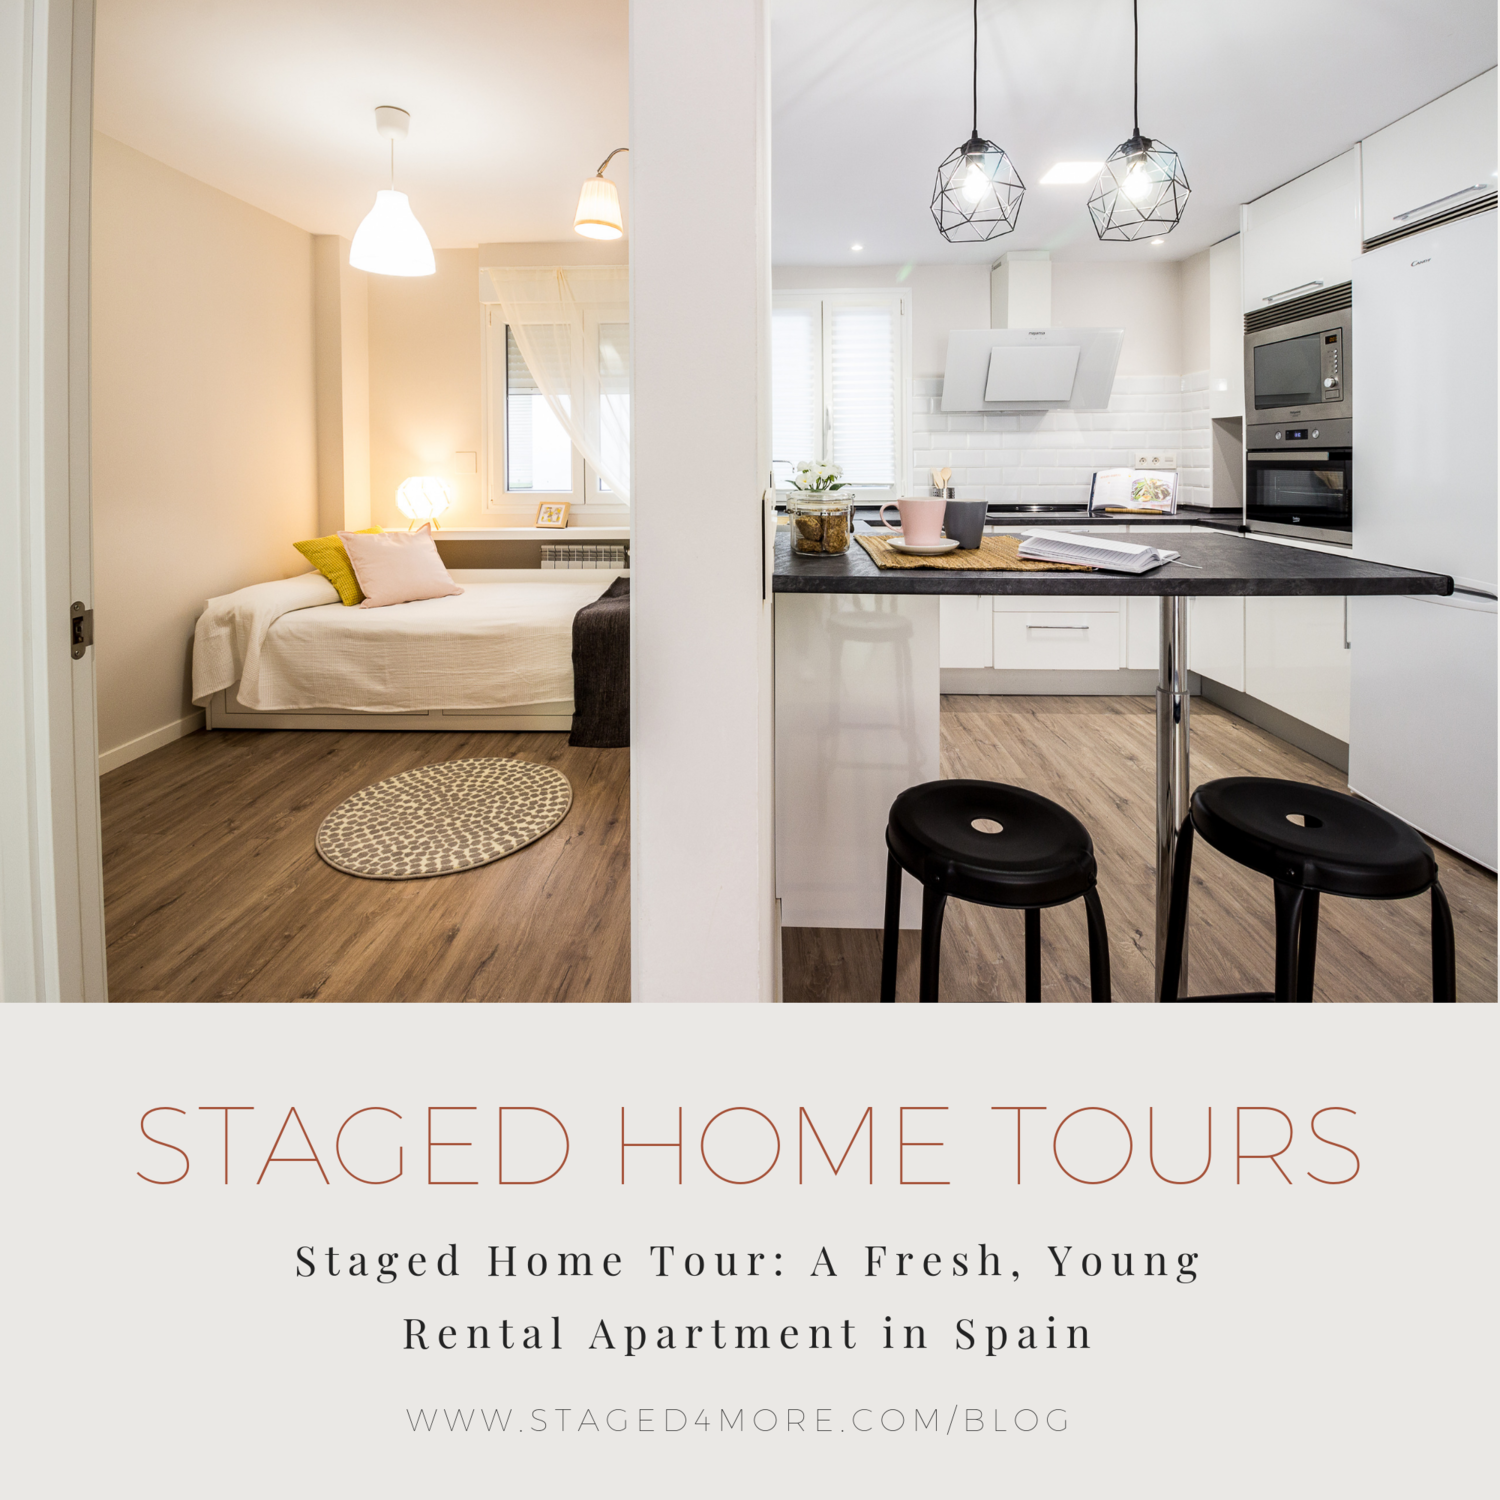 Staged4more+Staged+Home+Tour+A+Young+and+Fresh+Rental+Apartment+in+Spain.png